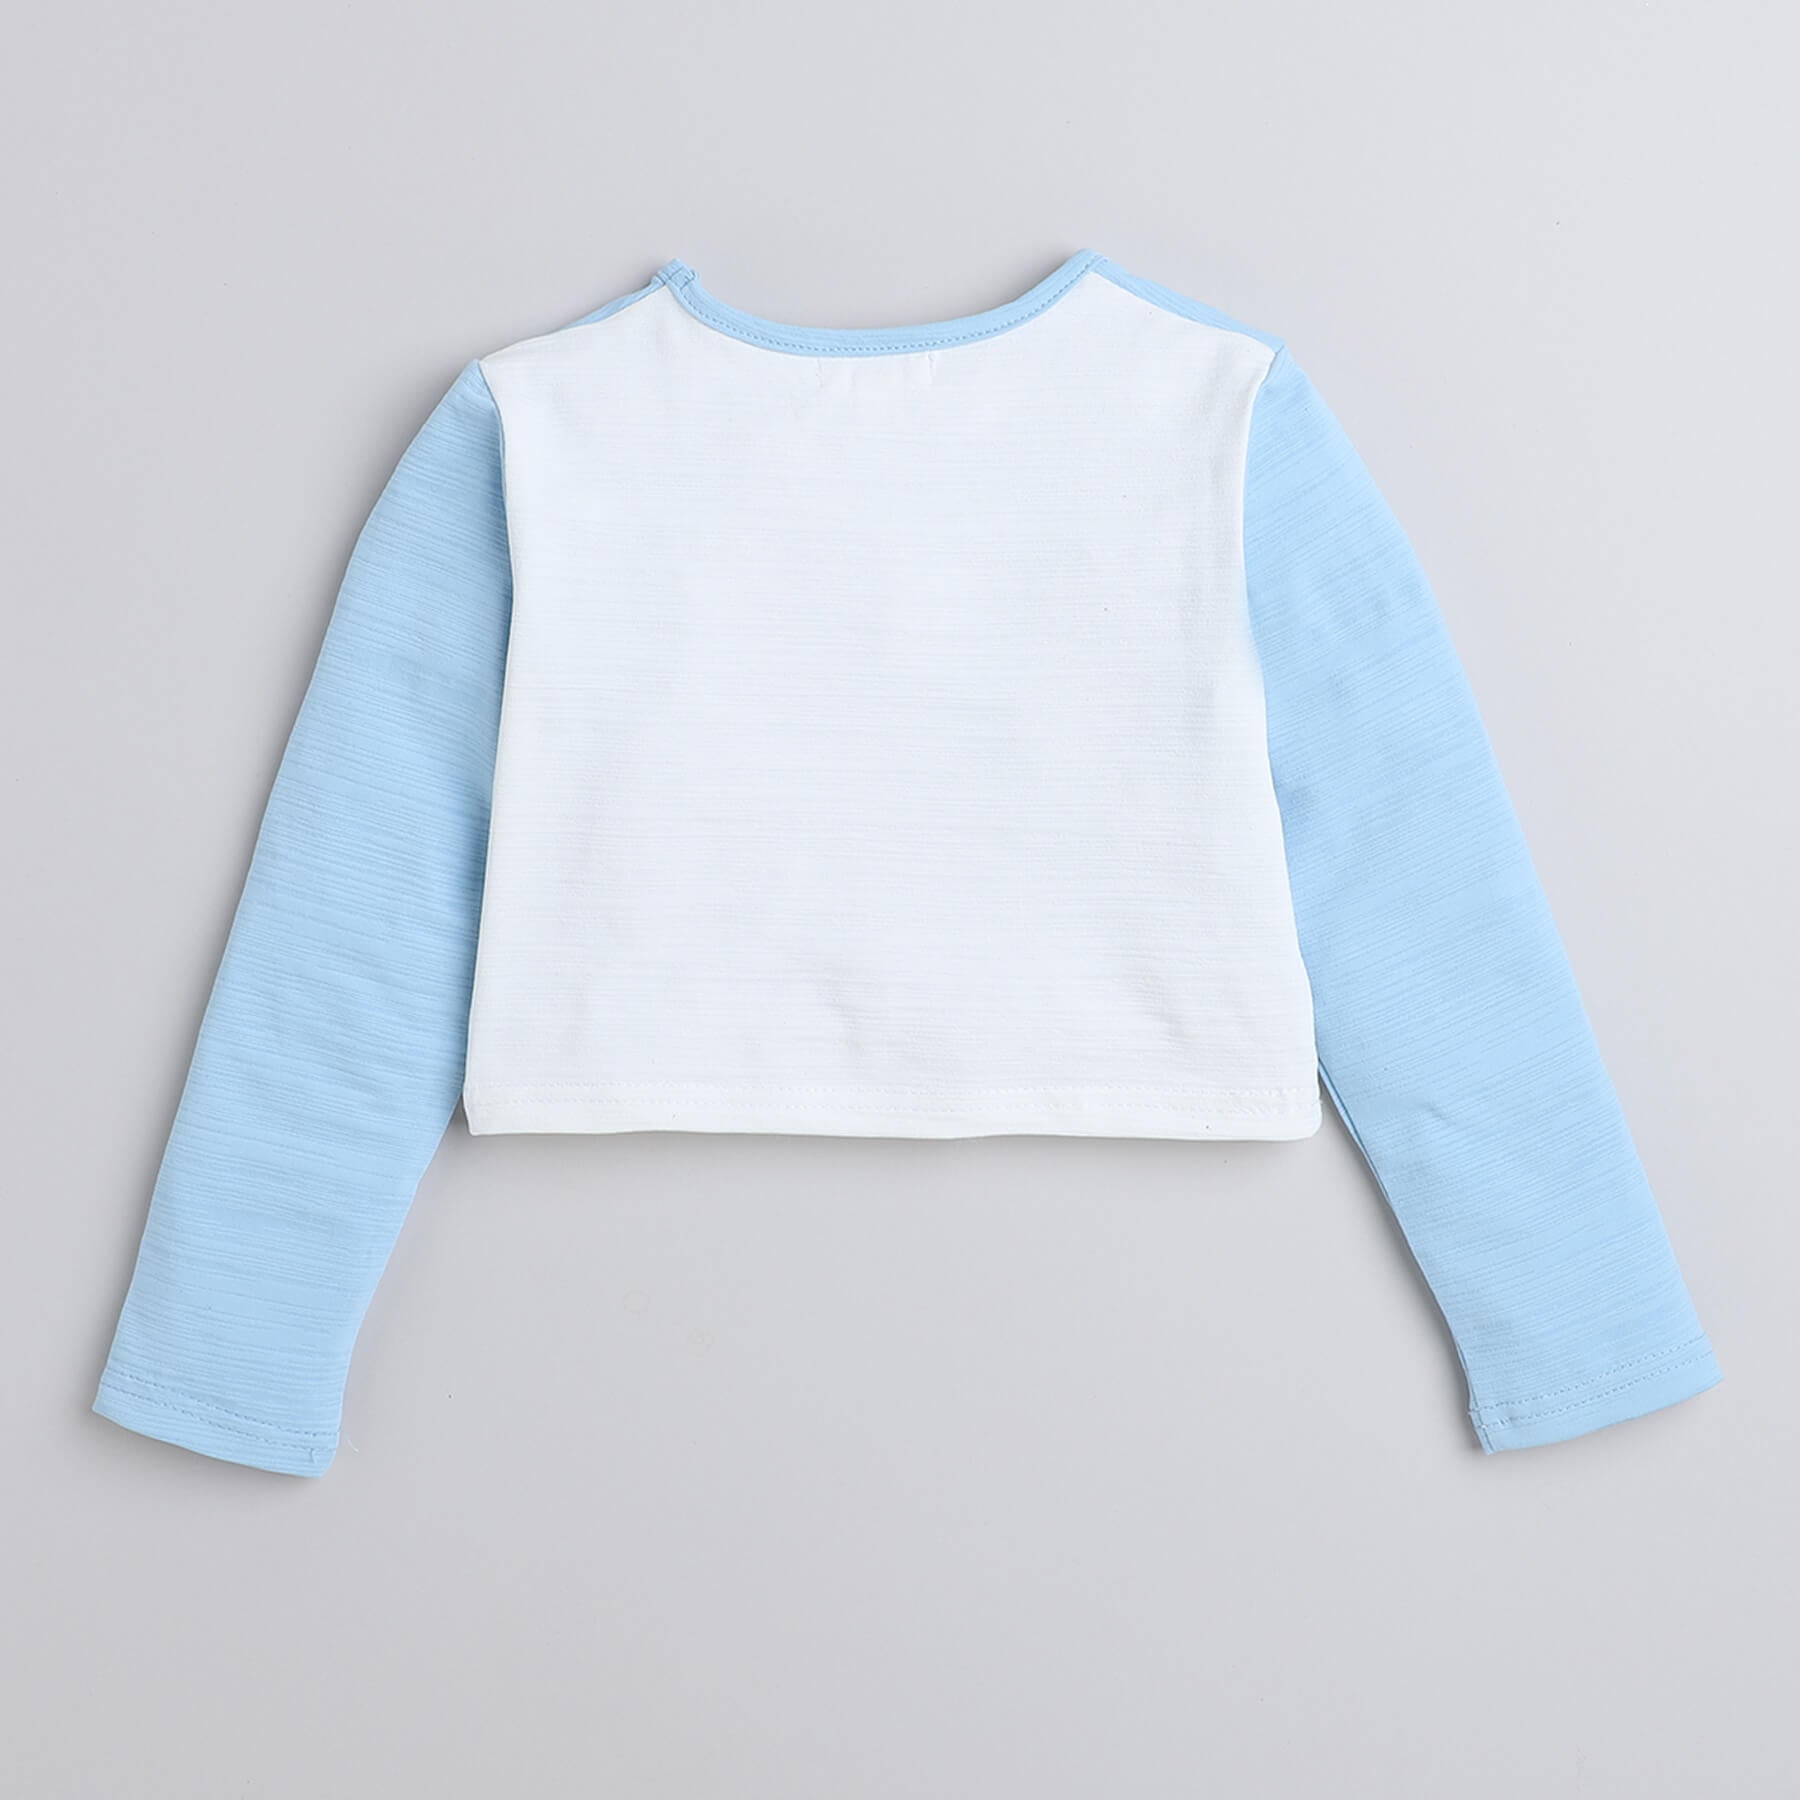 Taffykids color block crop top and cut out detail crop top pack of  2- Blue/white,Yellow